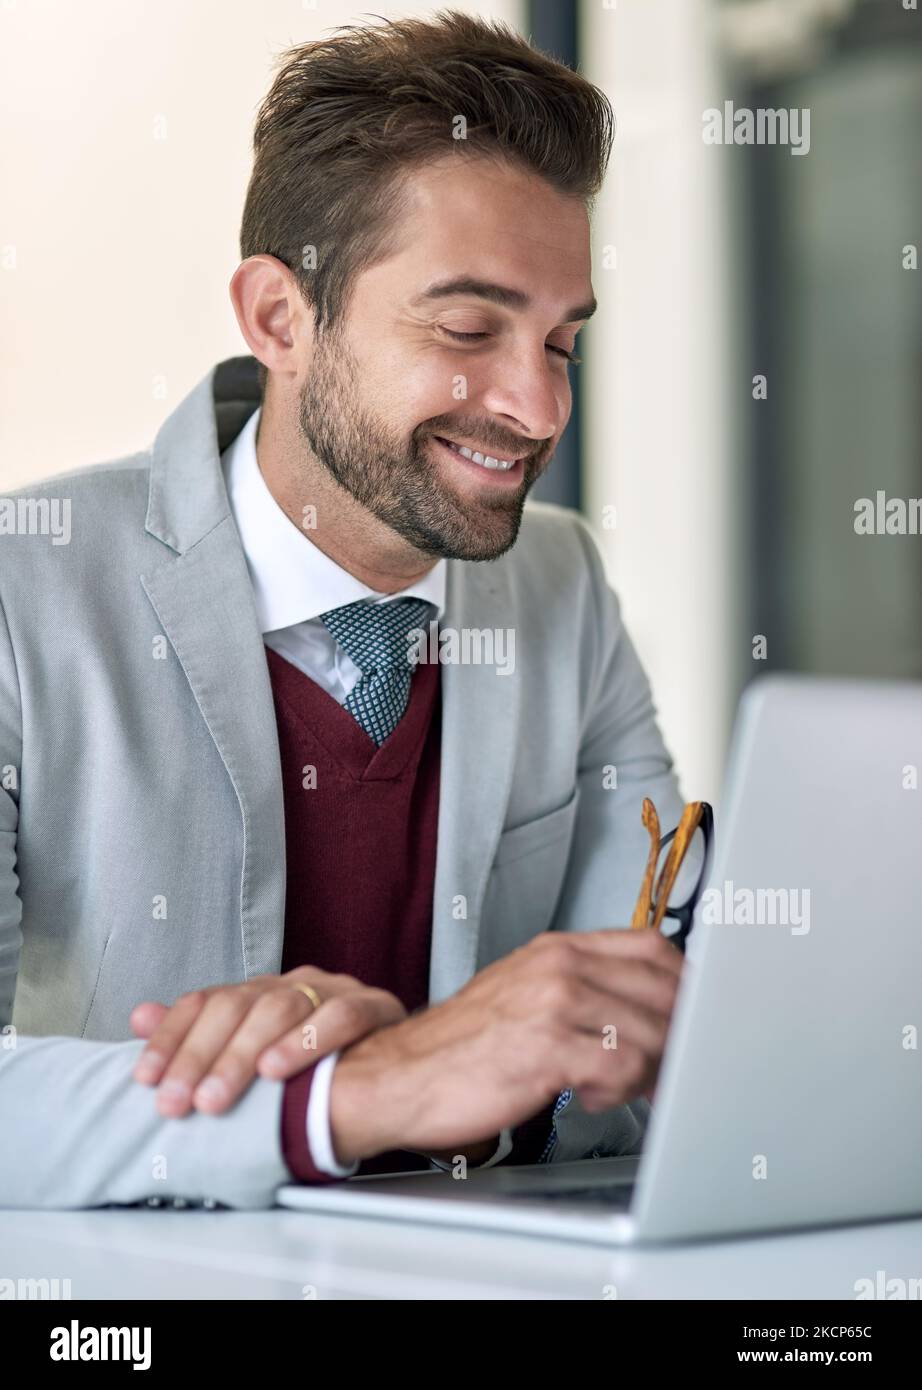 Working his ambitious dream. a businessman using a laptop at his office desk. Stock Photo